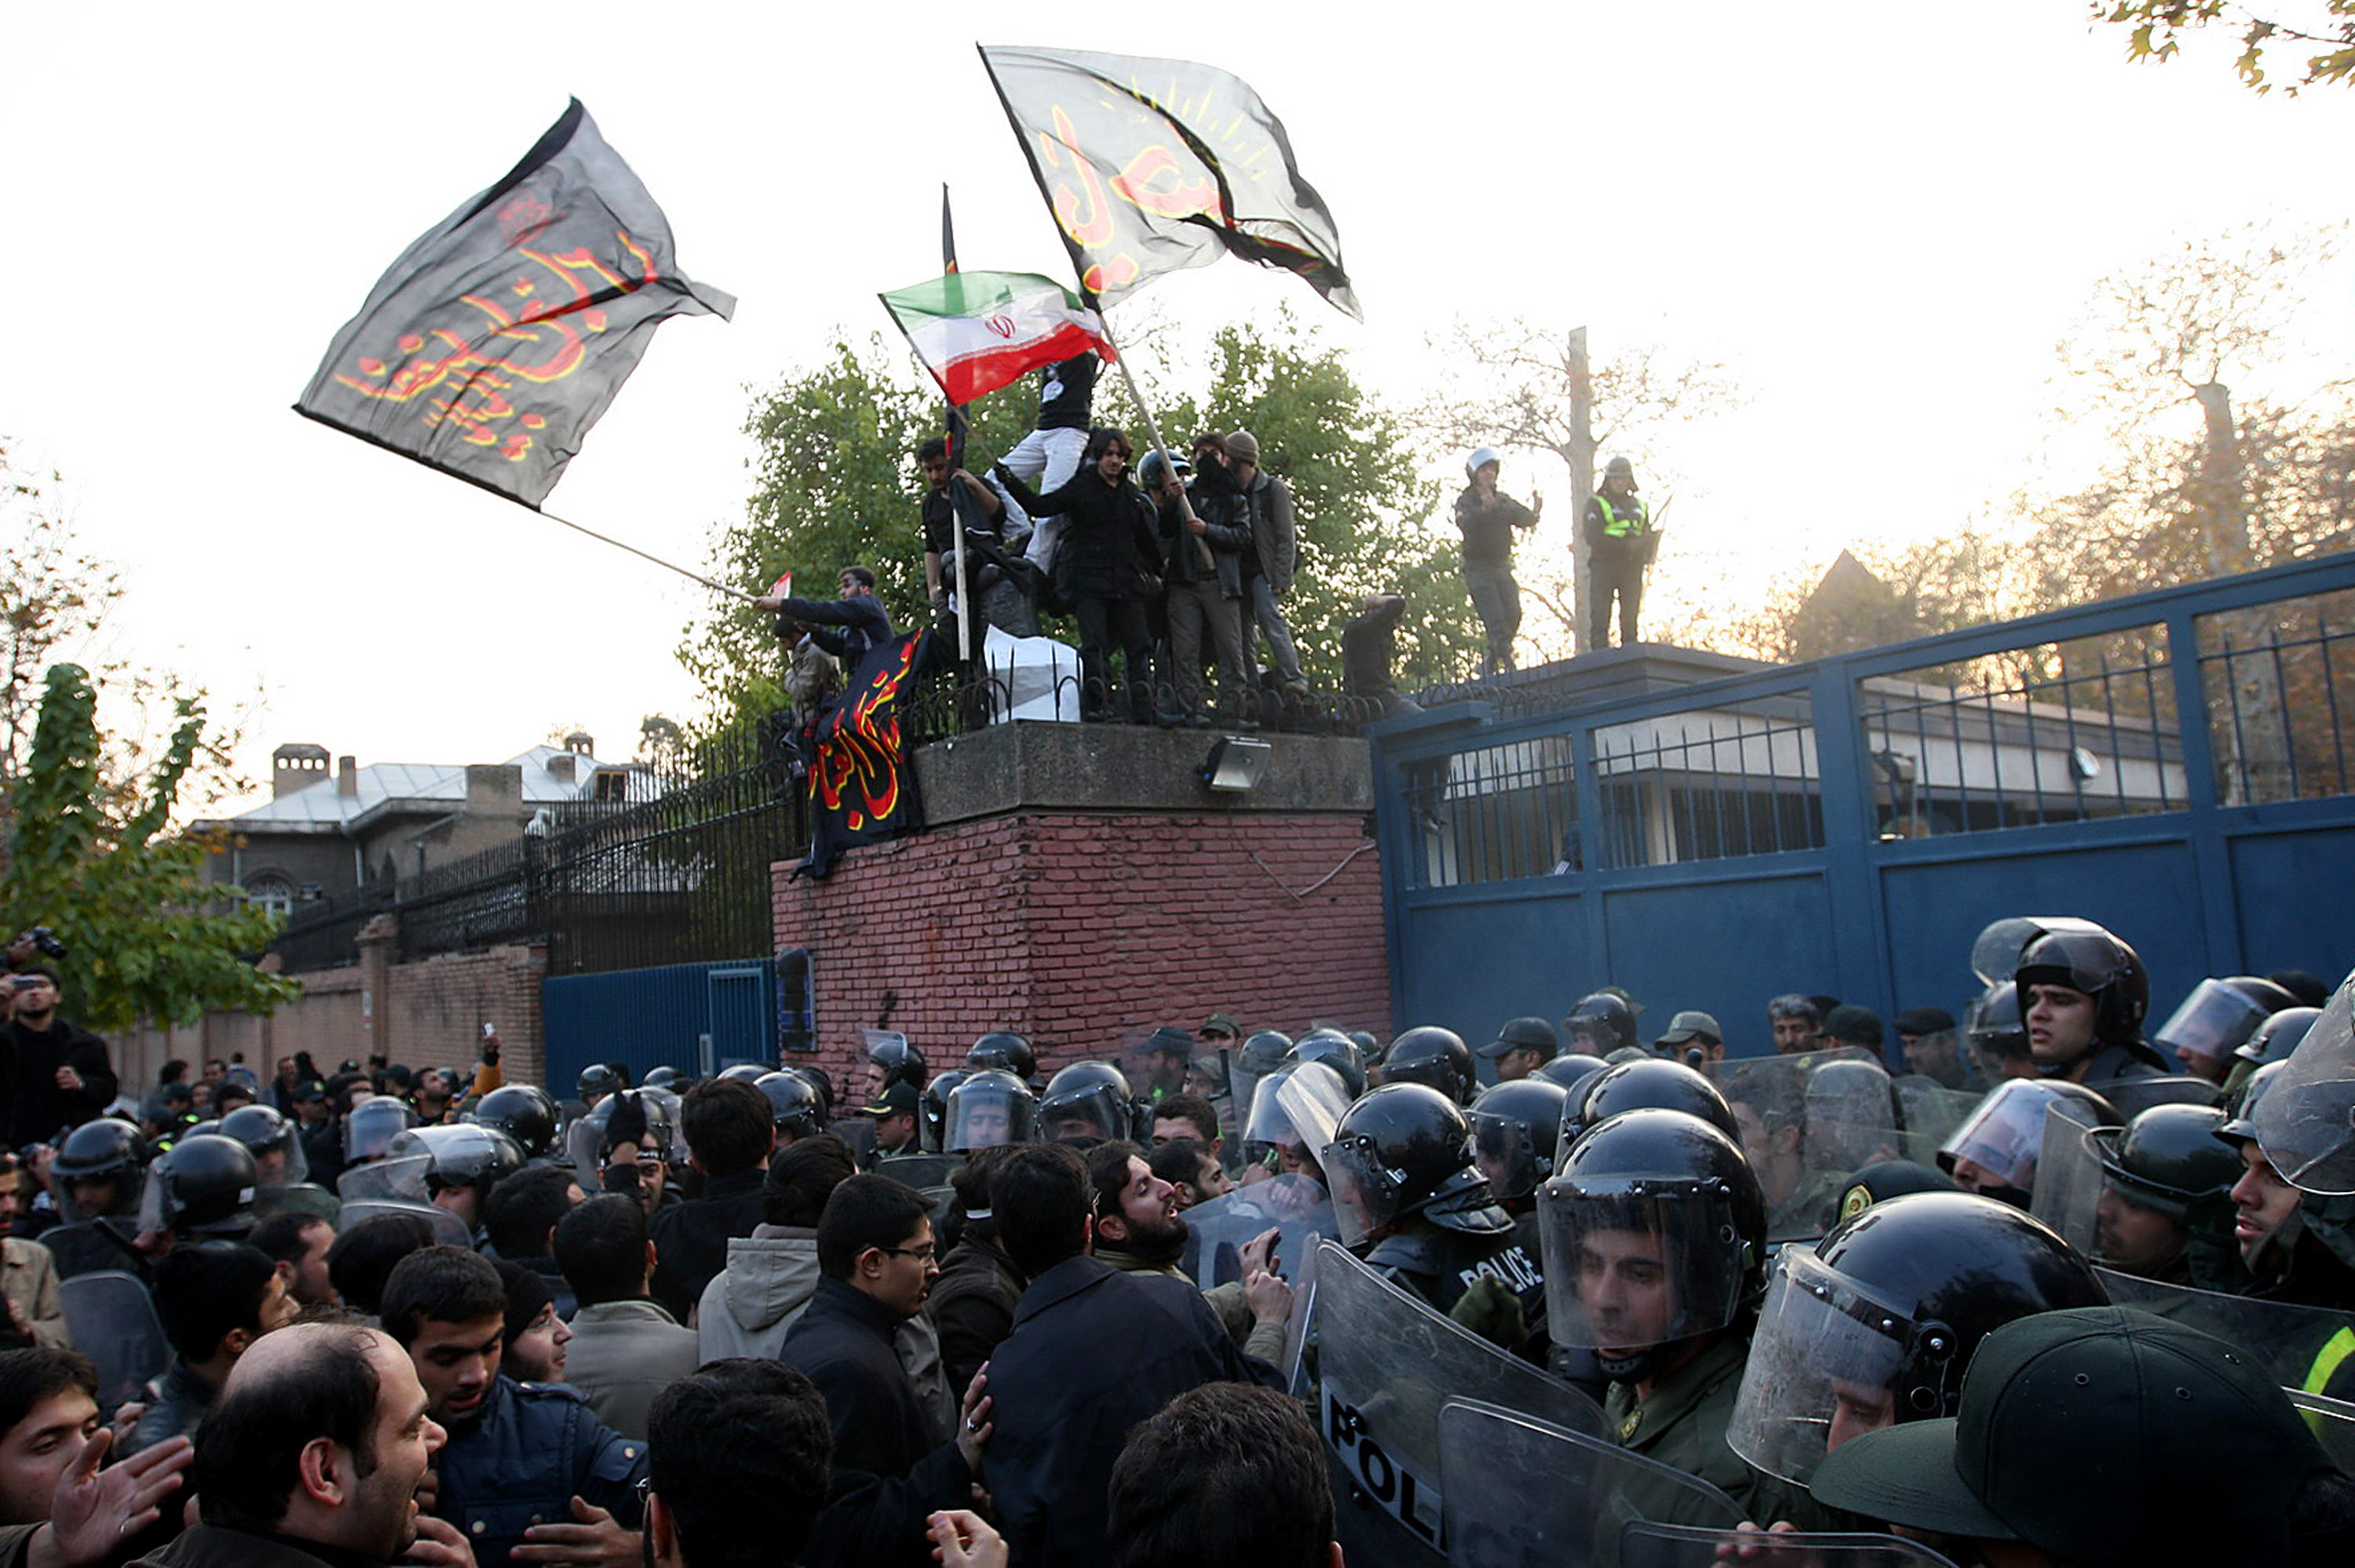 A large number of protesters prepare to break in to the British Embassy during an anti-British demonstration on November 29, 2011 in Tehran, Iran. (FarsNews/Getty Images)